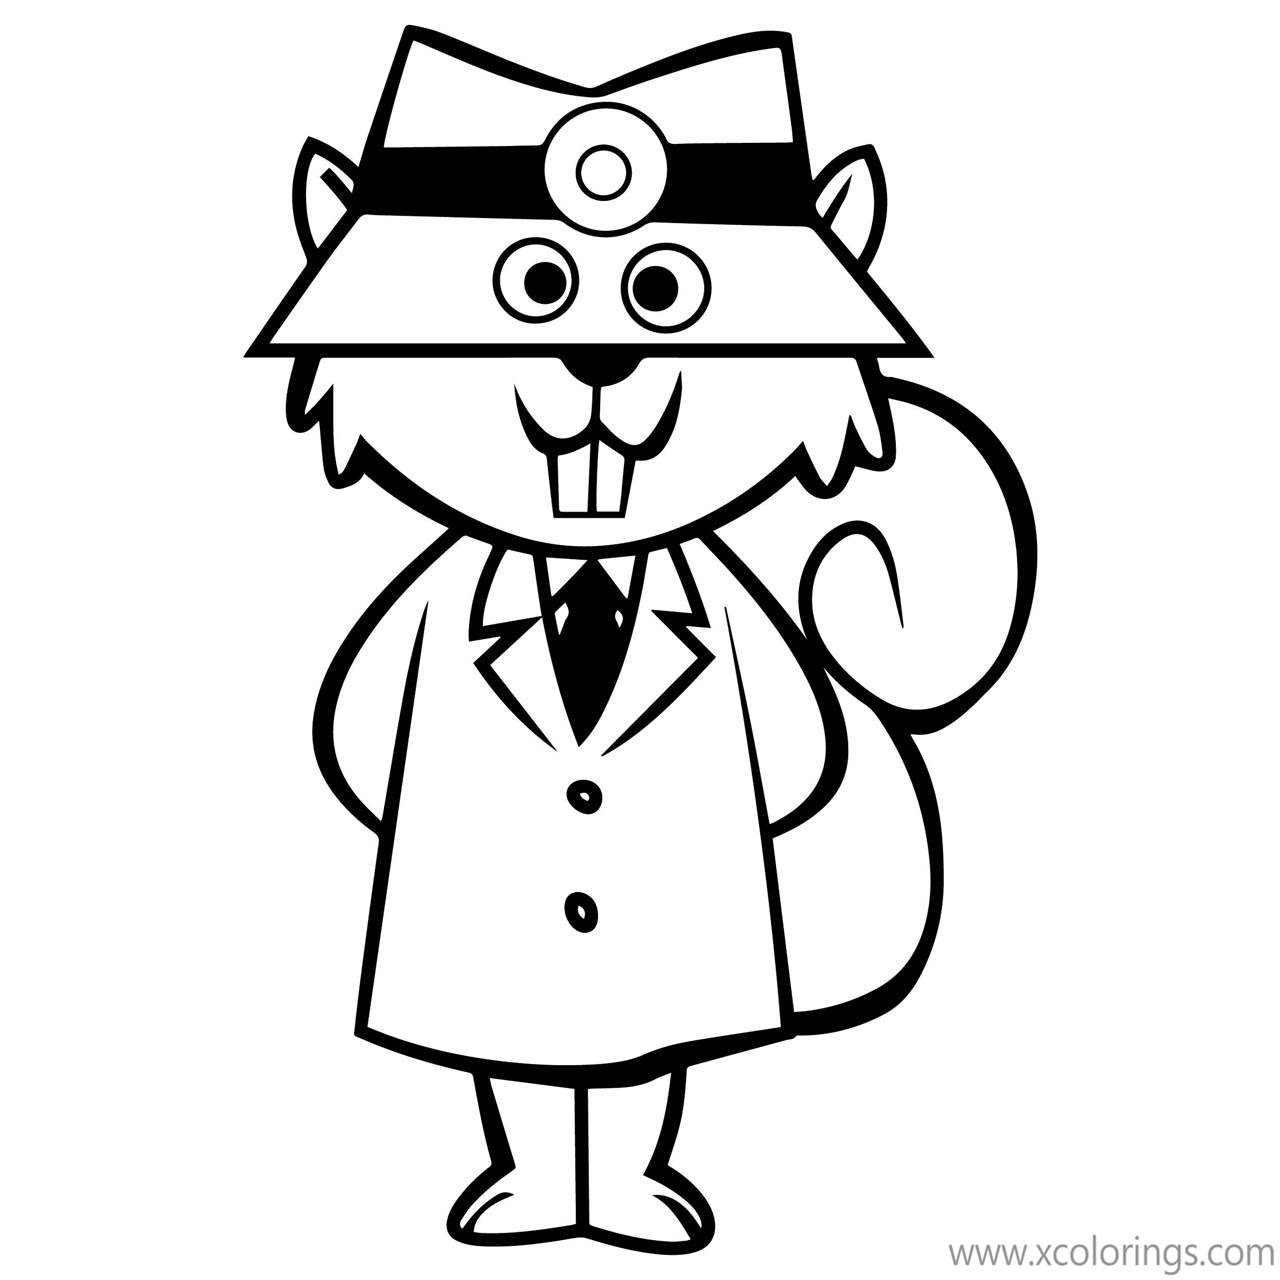 Free Secret Squirrel as Doctor Coloring Page printable